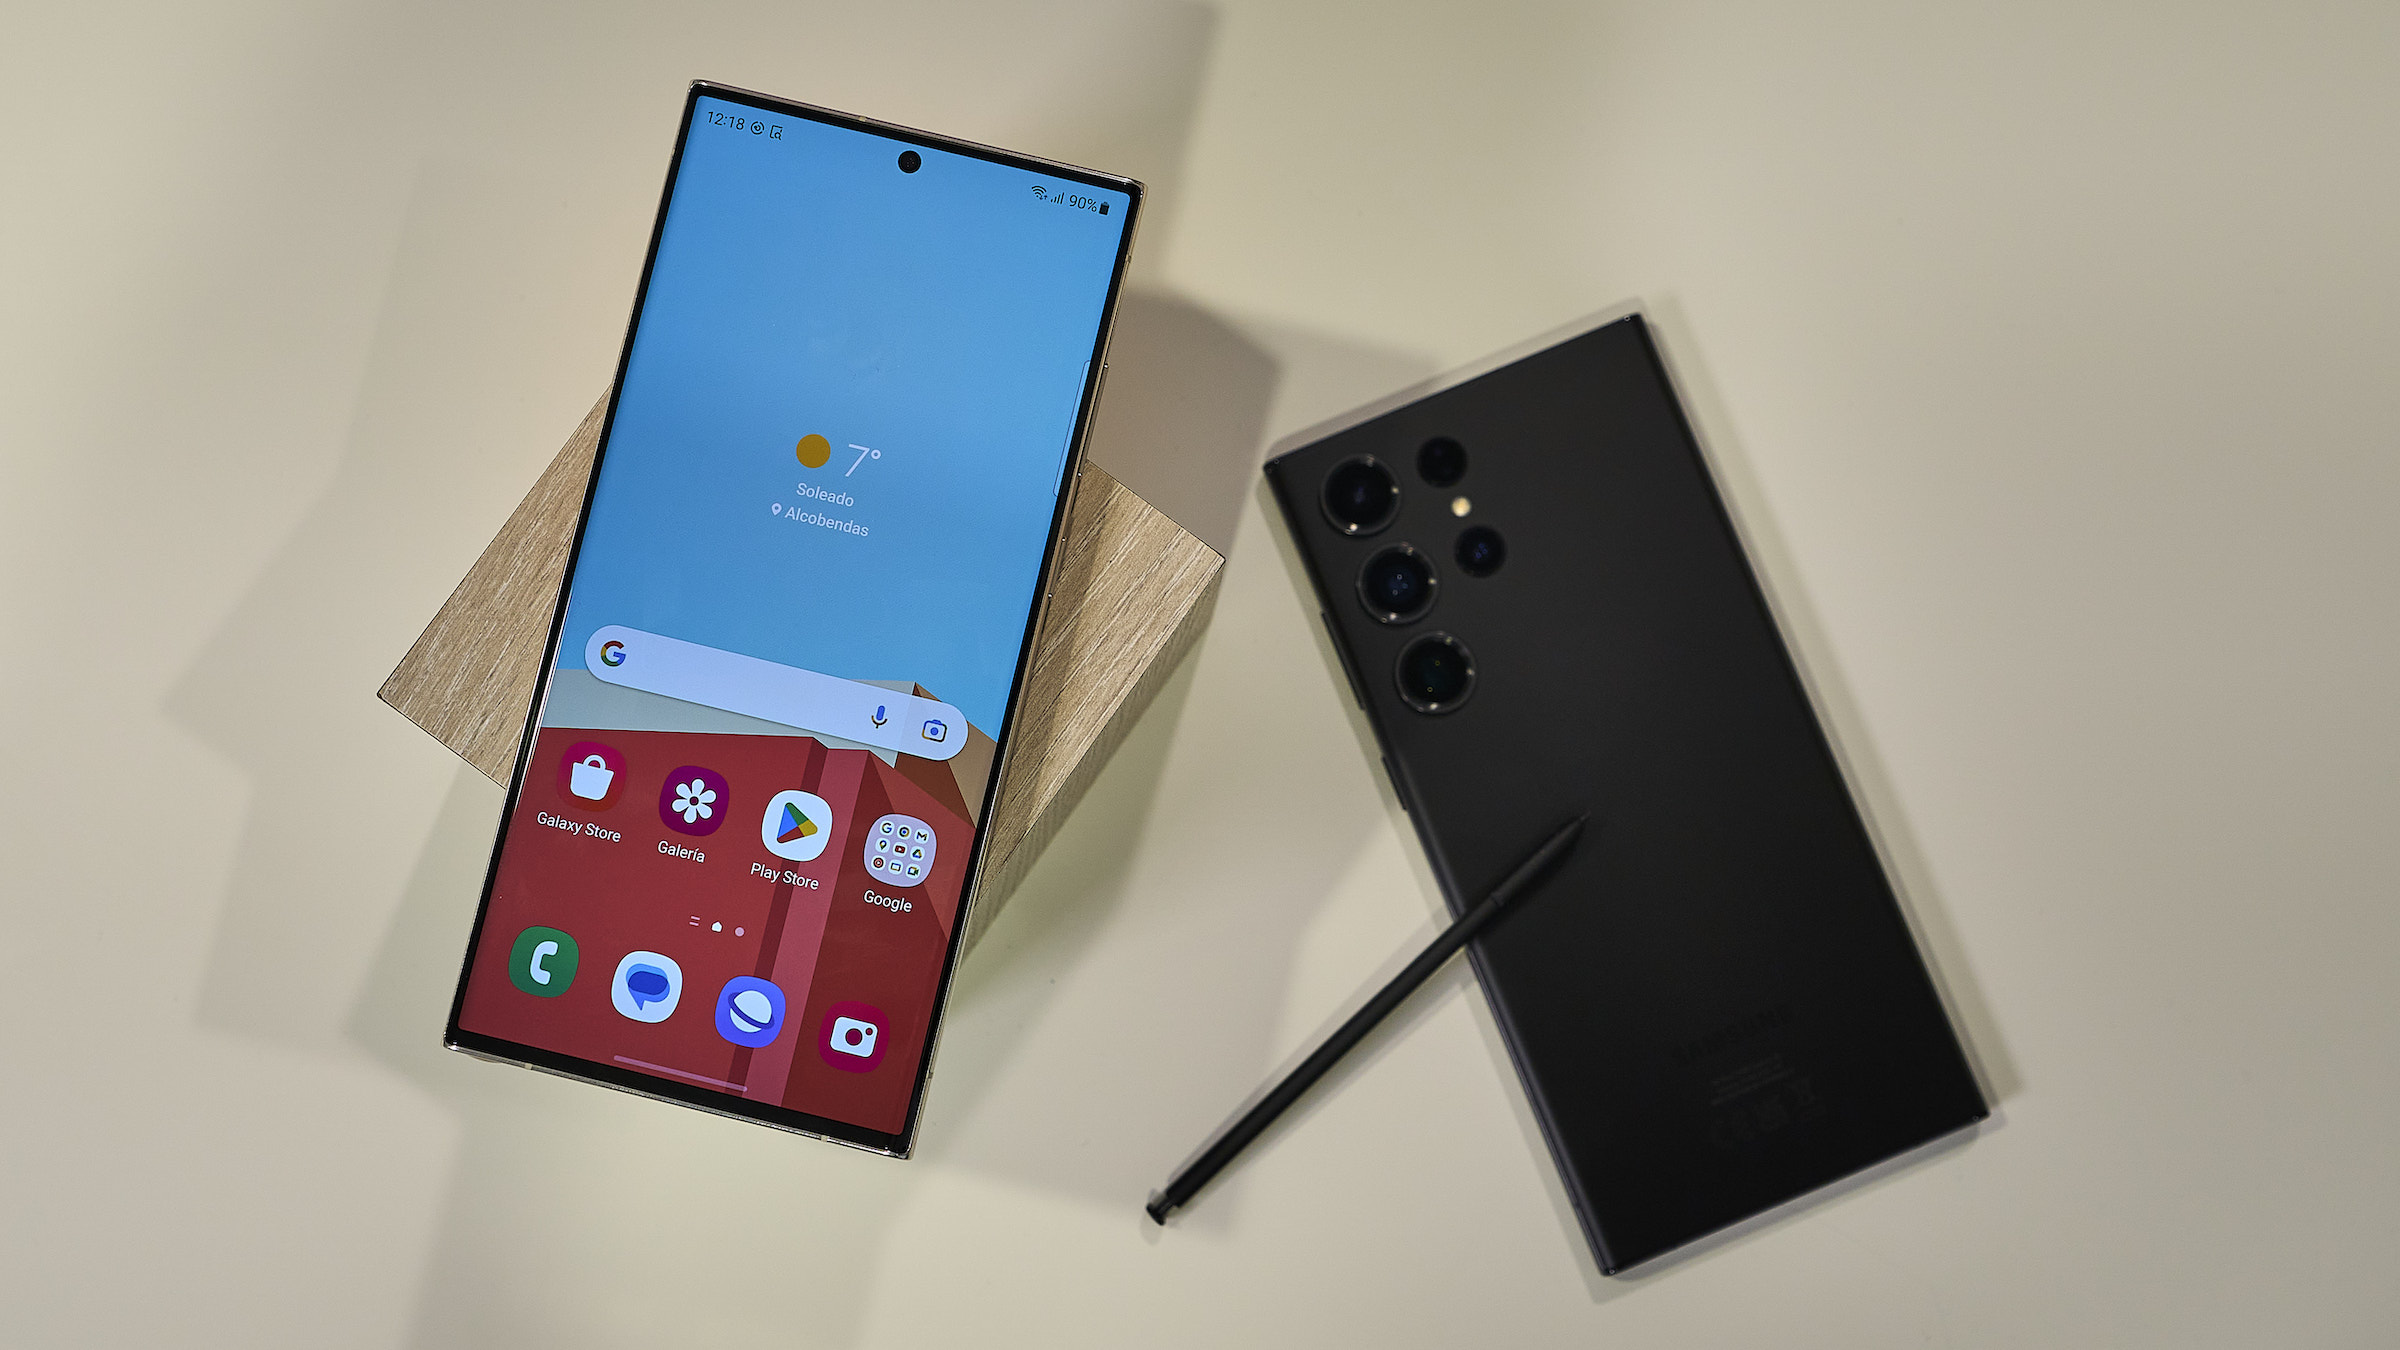 Samsung Galaxy Note 10 Plus Archives - Counterpoint